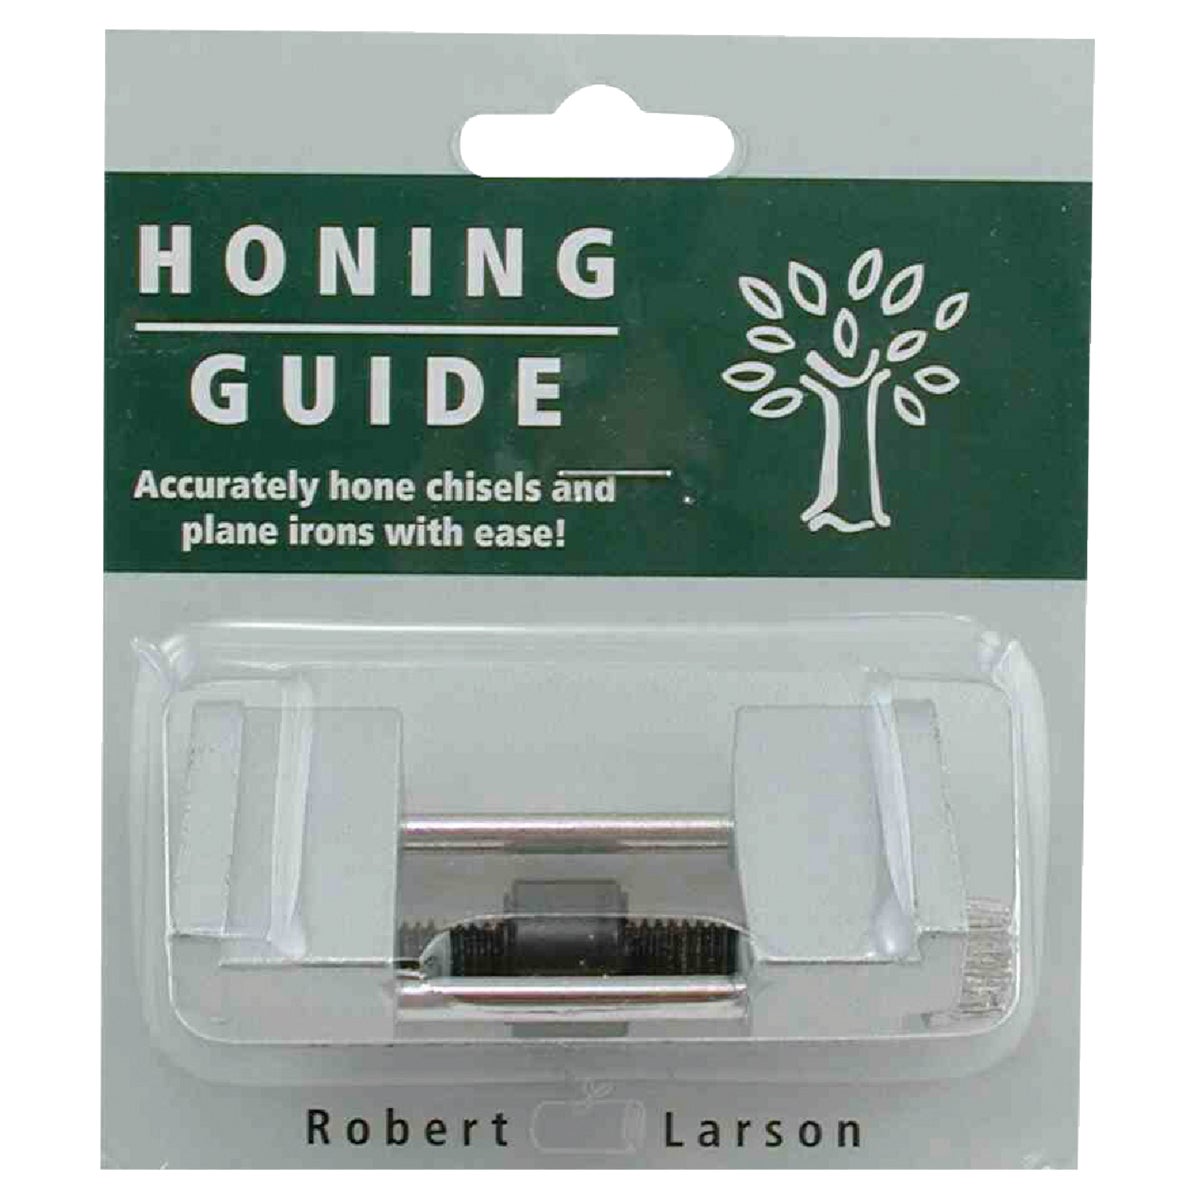 Item 316367, This simple-to-use tool will securely hold wood chisels and plane irons at 